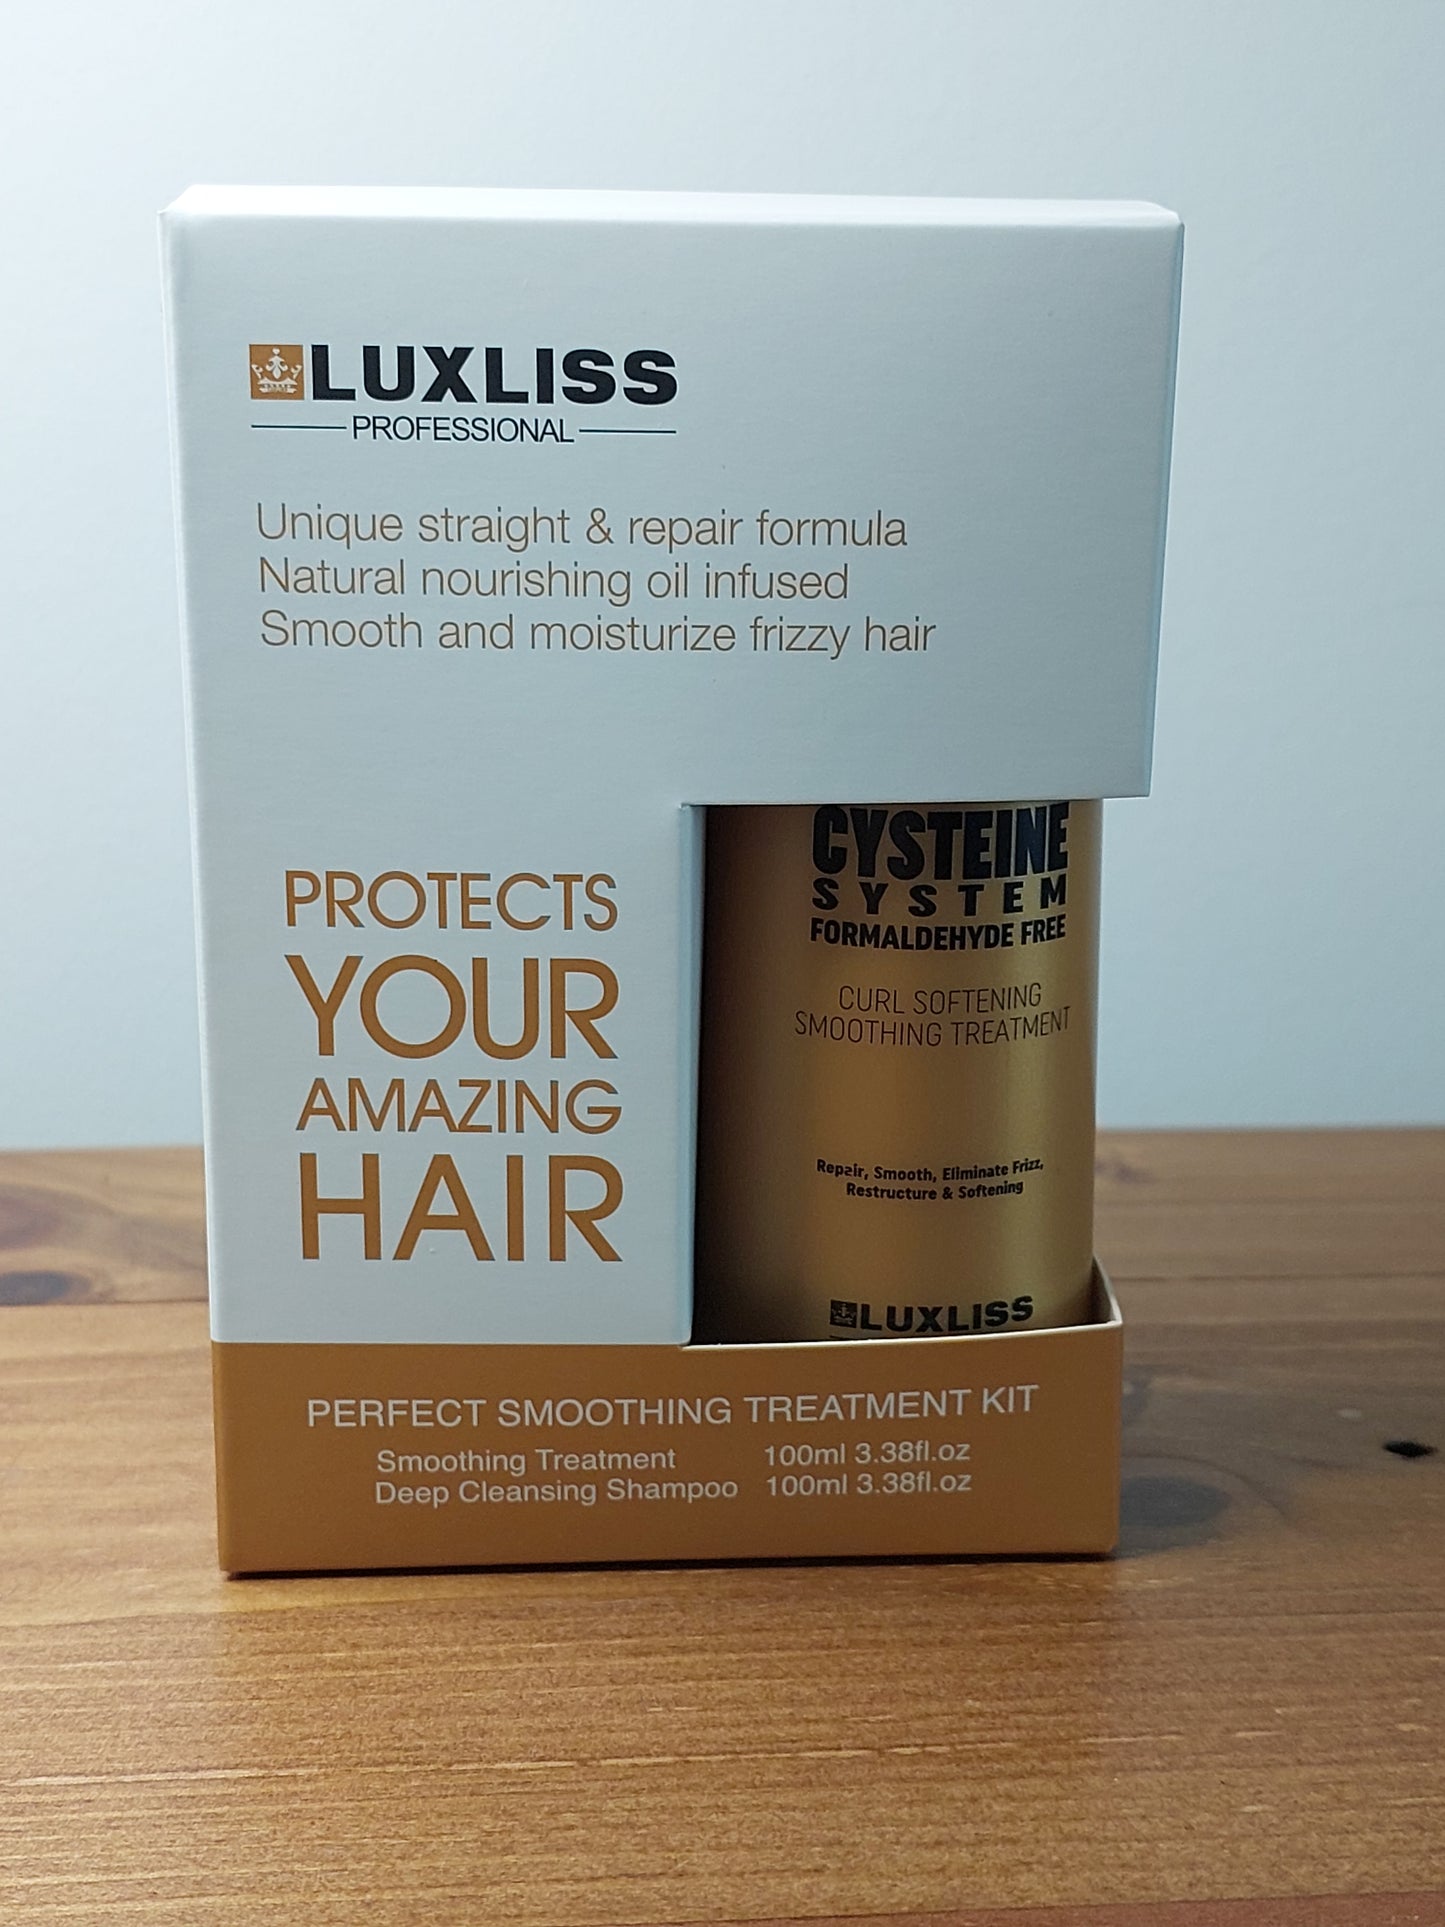 Luxliss Keratin Cysteine System and Curl softening Smooth treatment 100ml